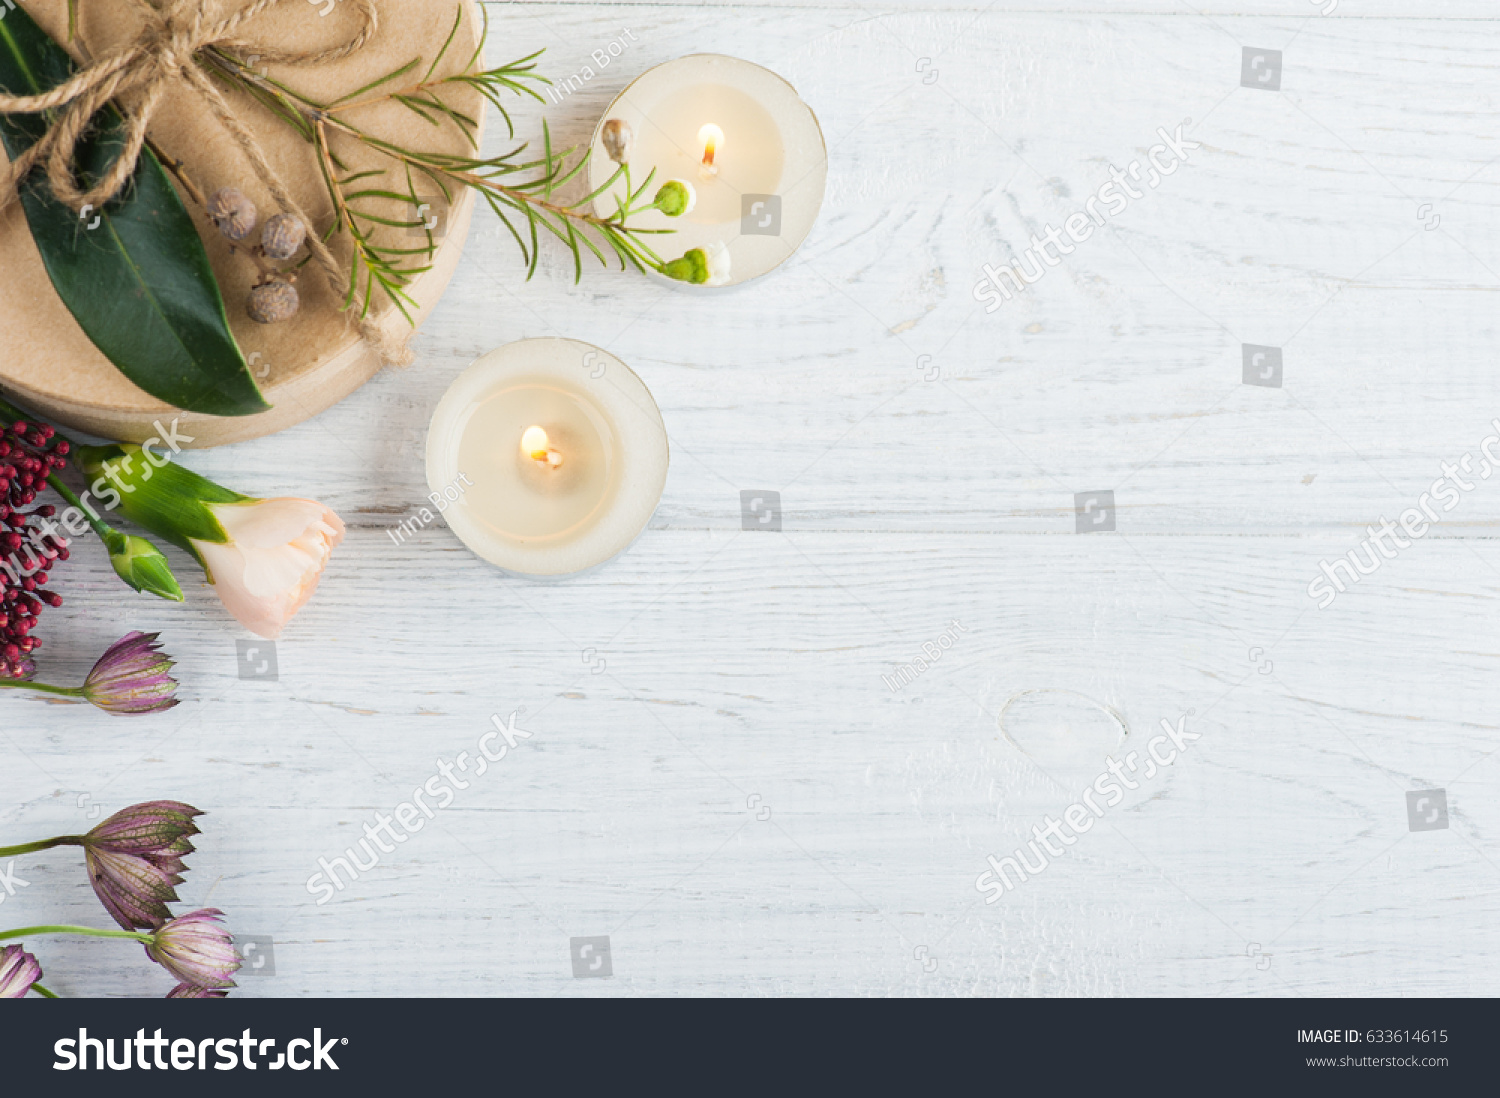 Gifts Flowers On Wooden Background Top Stock Photo Edit Now 633614615